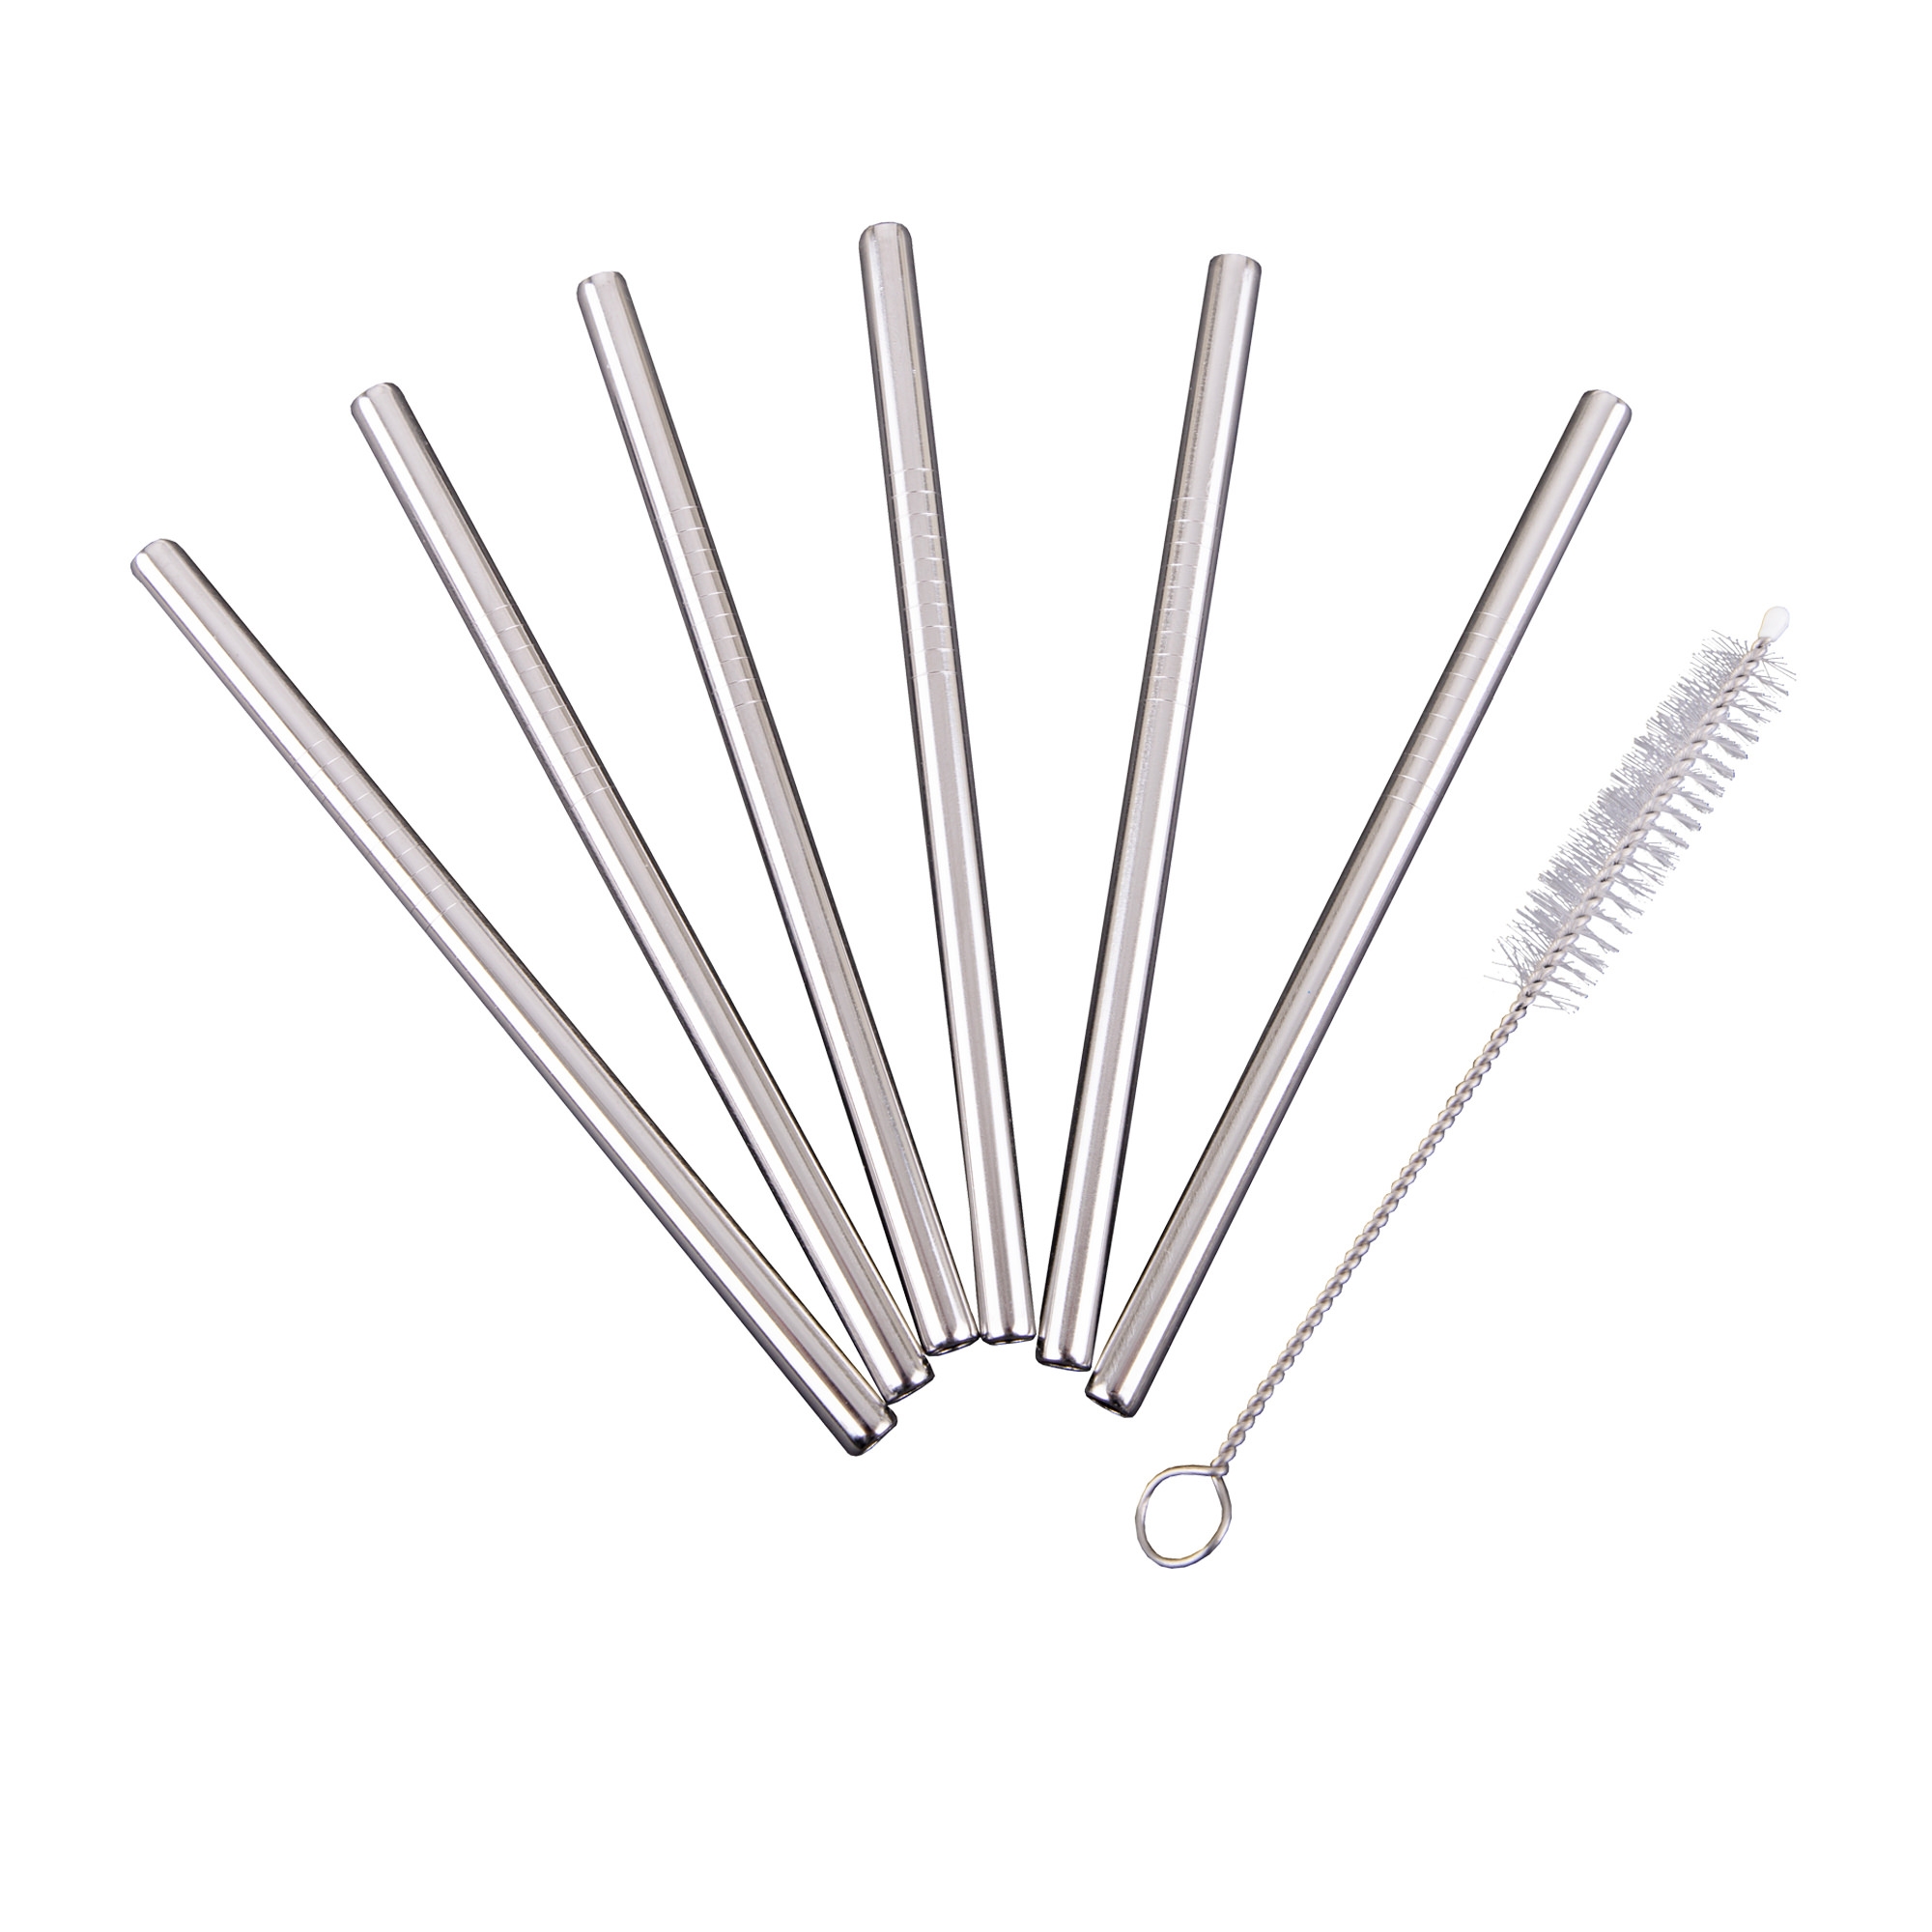 Appetito Stainless Steel Cocktail Straw with Brush Set of 6 Image 1